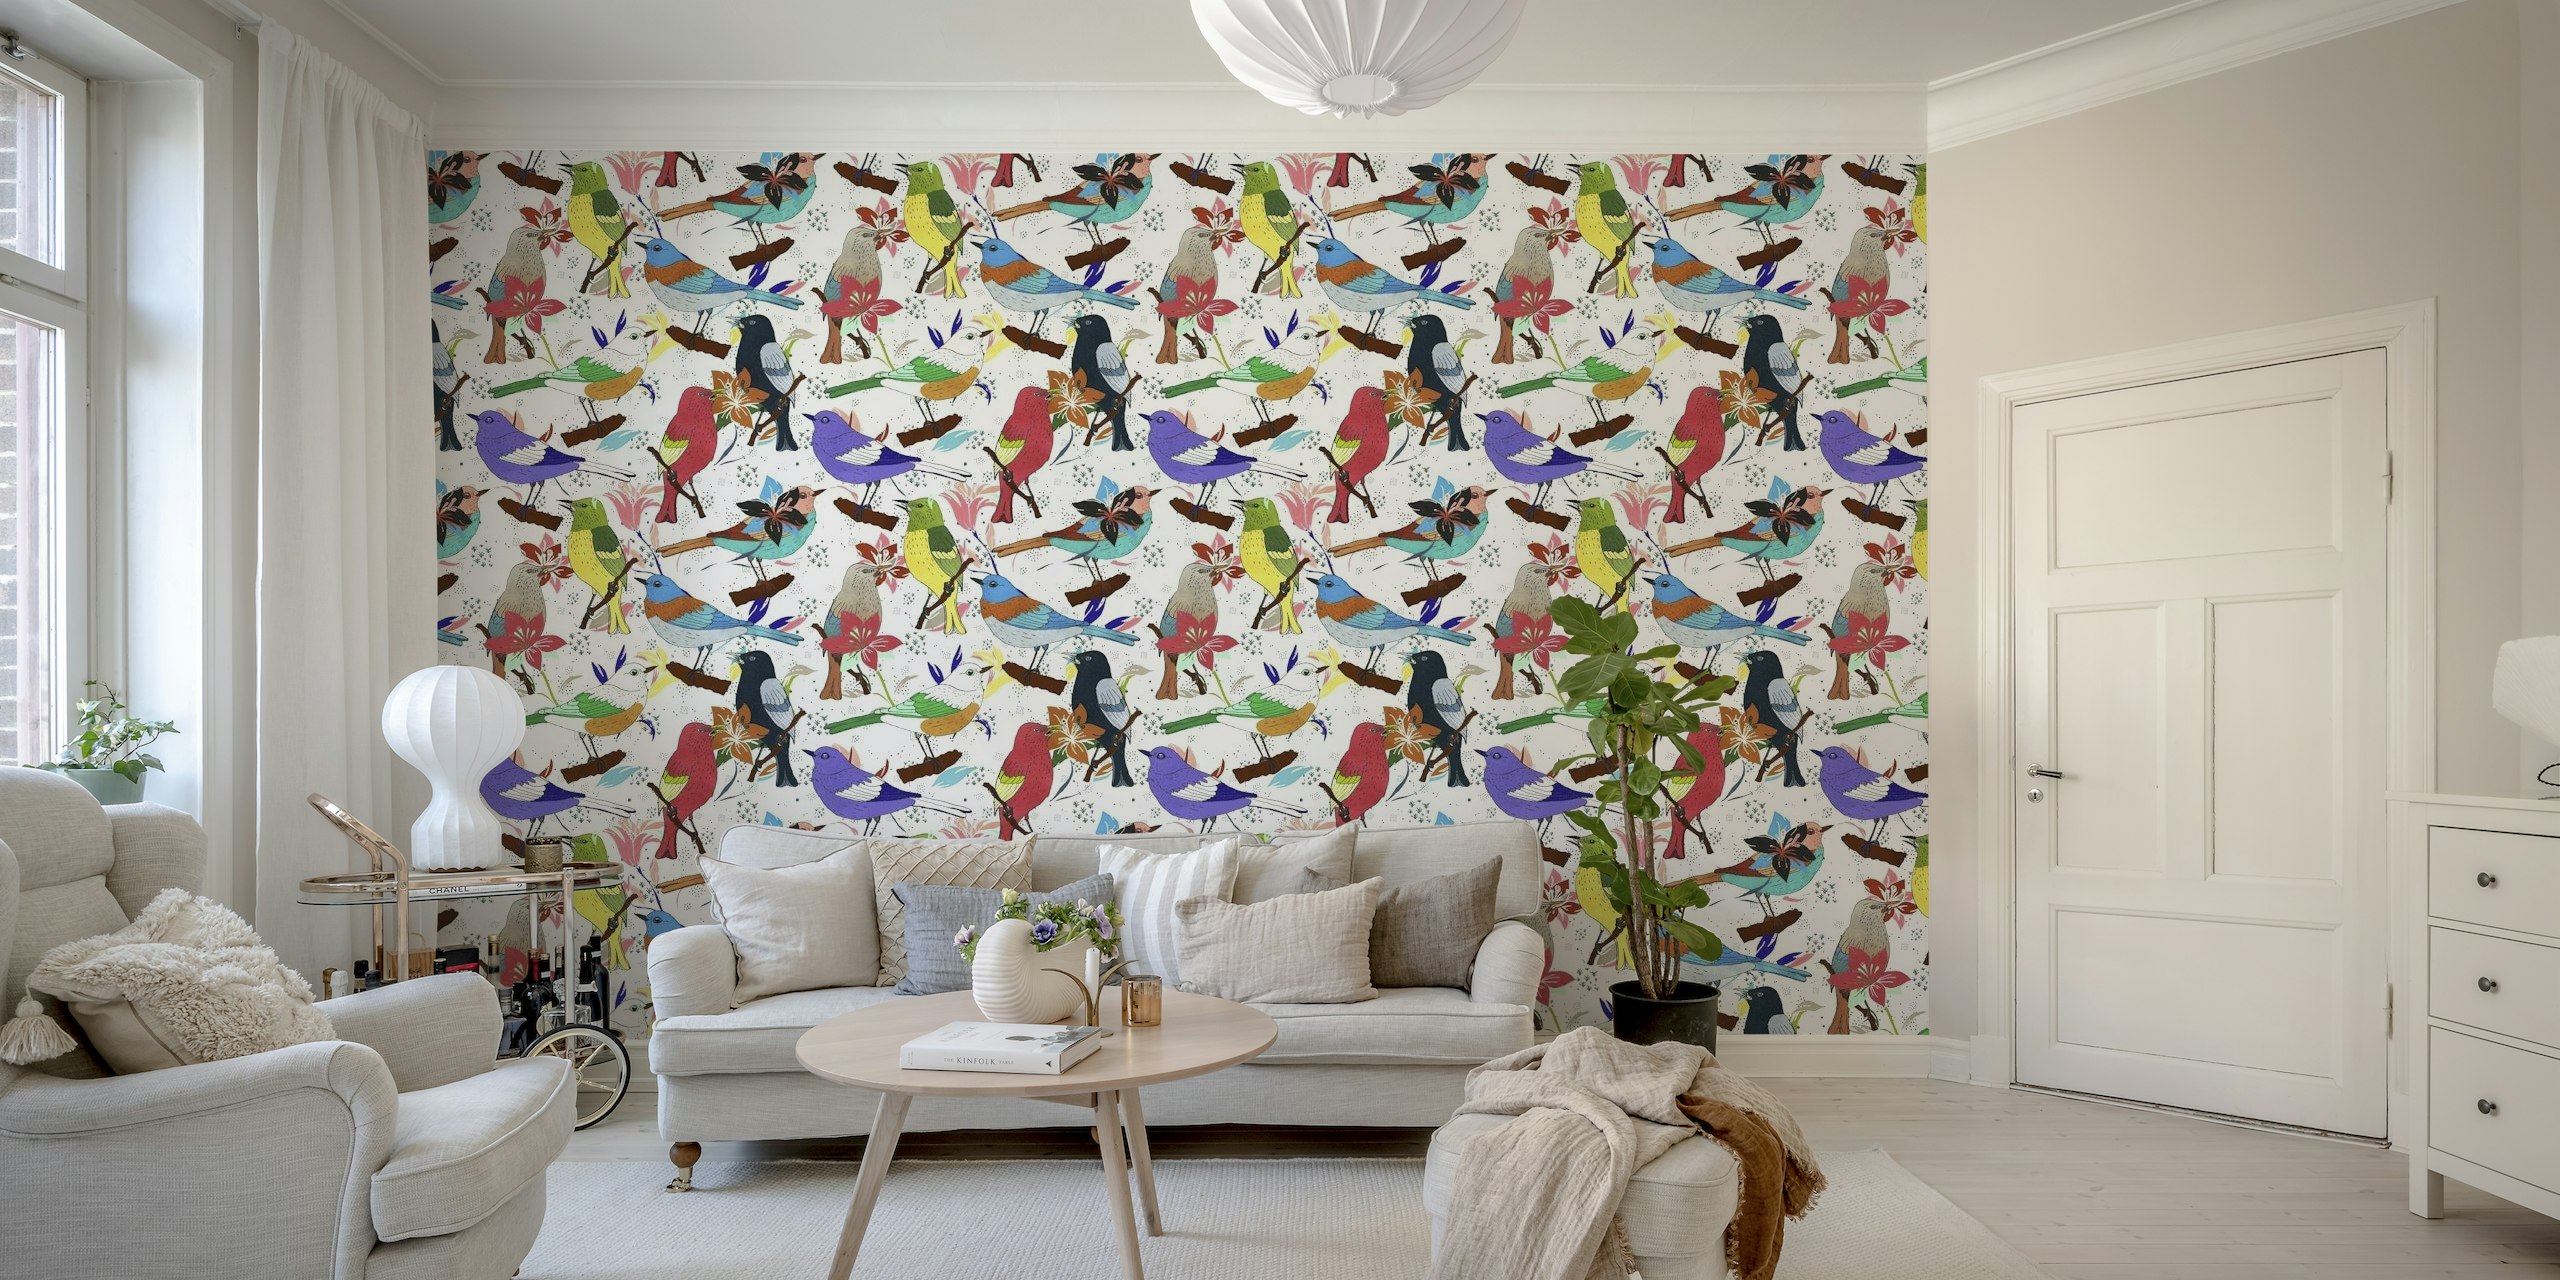 Maximalistic pattern of colorful birds tapety